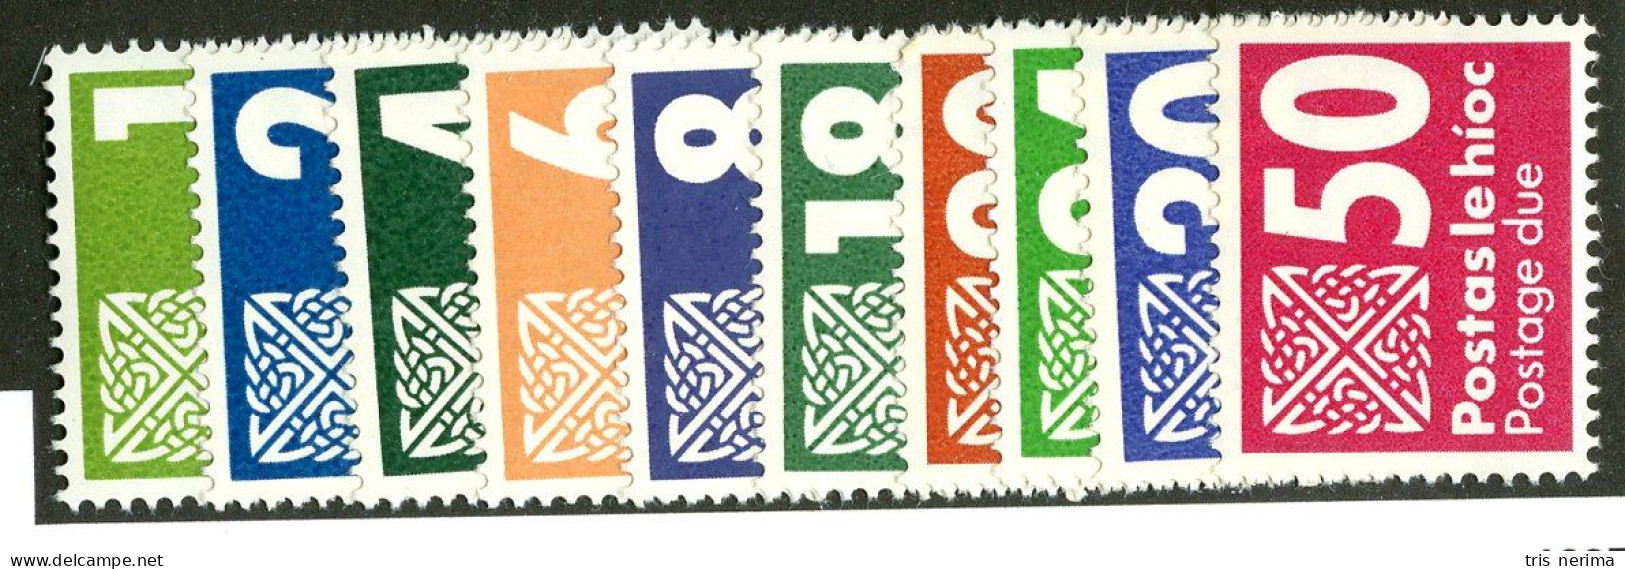 655 BCXX 1980  Scott # J28-36 Mnh** (offers Welcome) - Postage Due